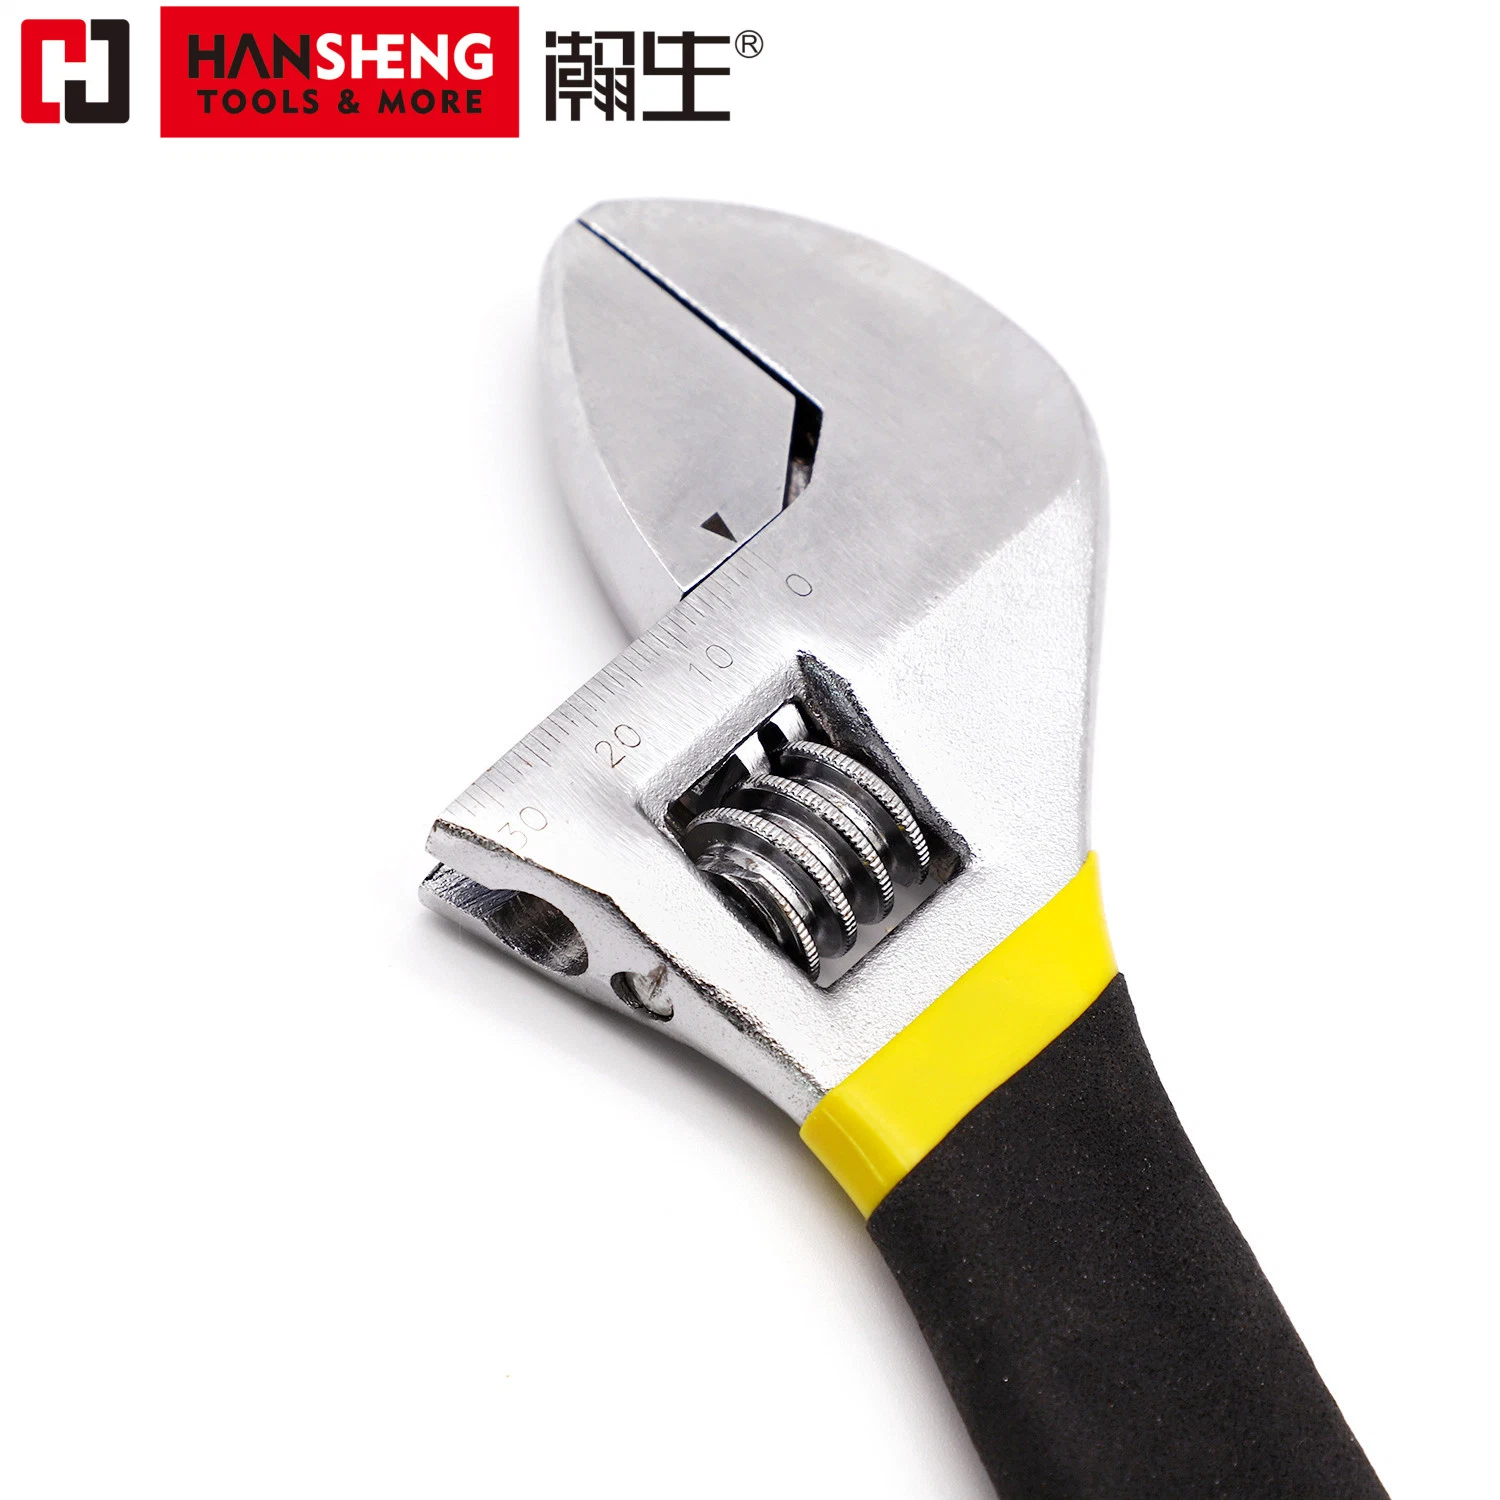 Professional Hand Tool, Made of CRV, High Carbon Steel, Chrome Plated, Hardware Tools, Adjustable Wrench